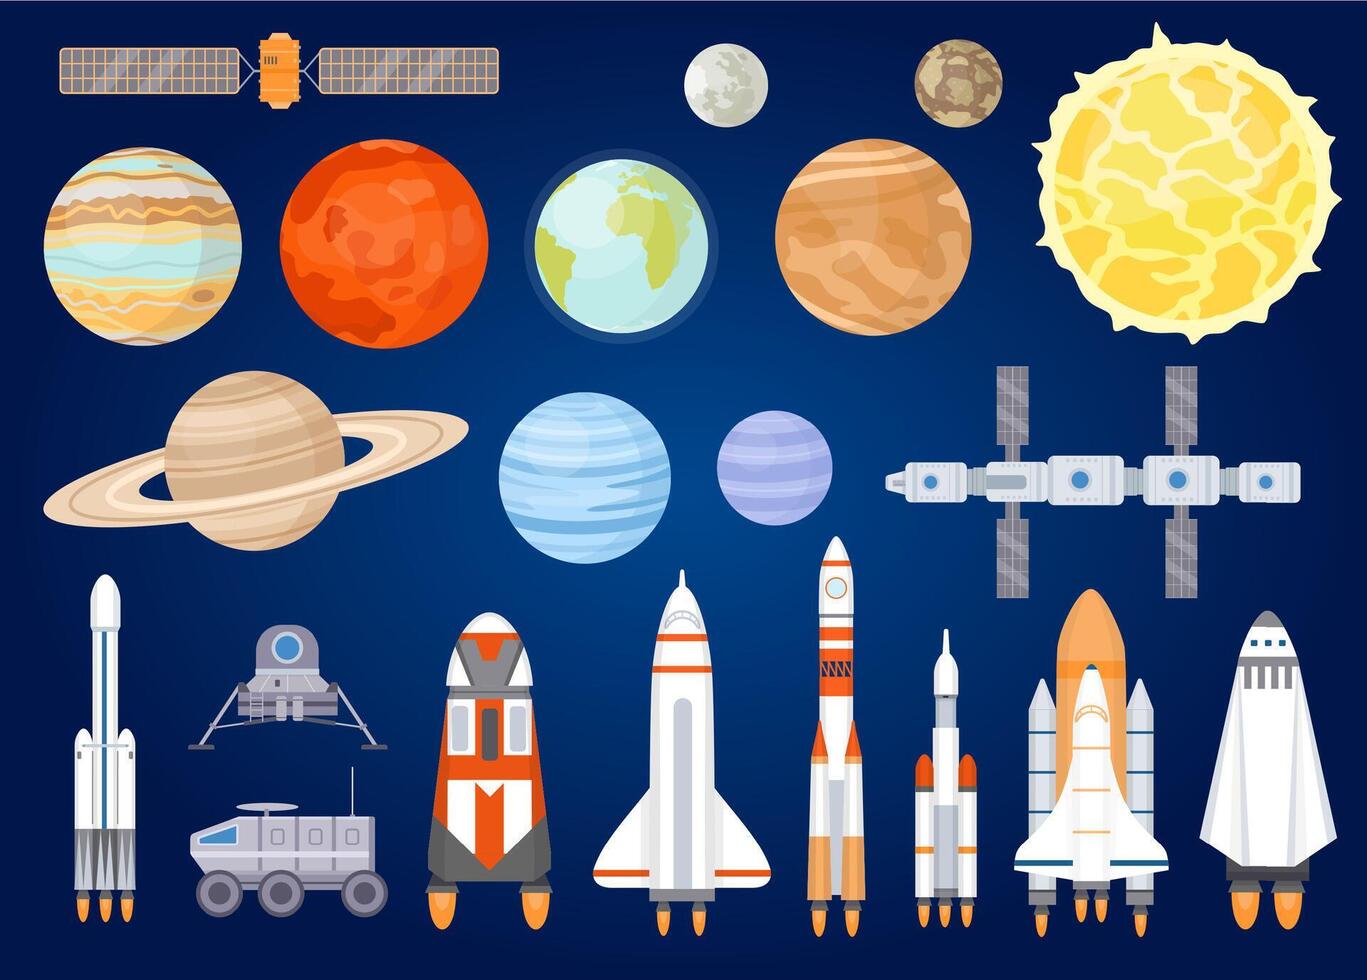 Space elements. Solar system planets, sun, spaceship, rocket, satellites, mars and moon rover. Universe exploring. Cartoon cosmic vector set